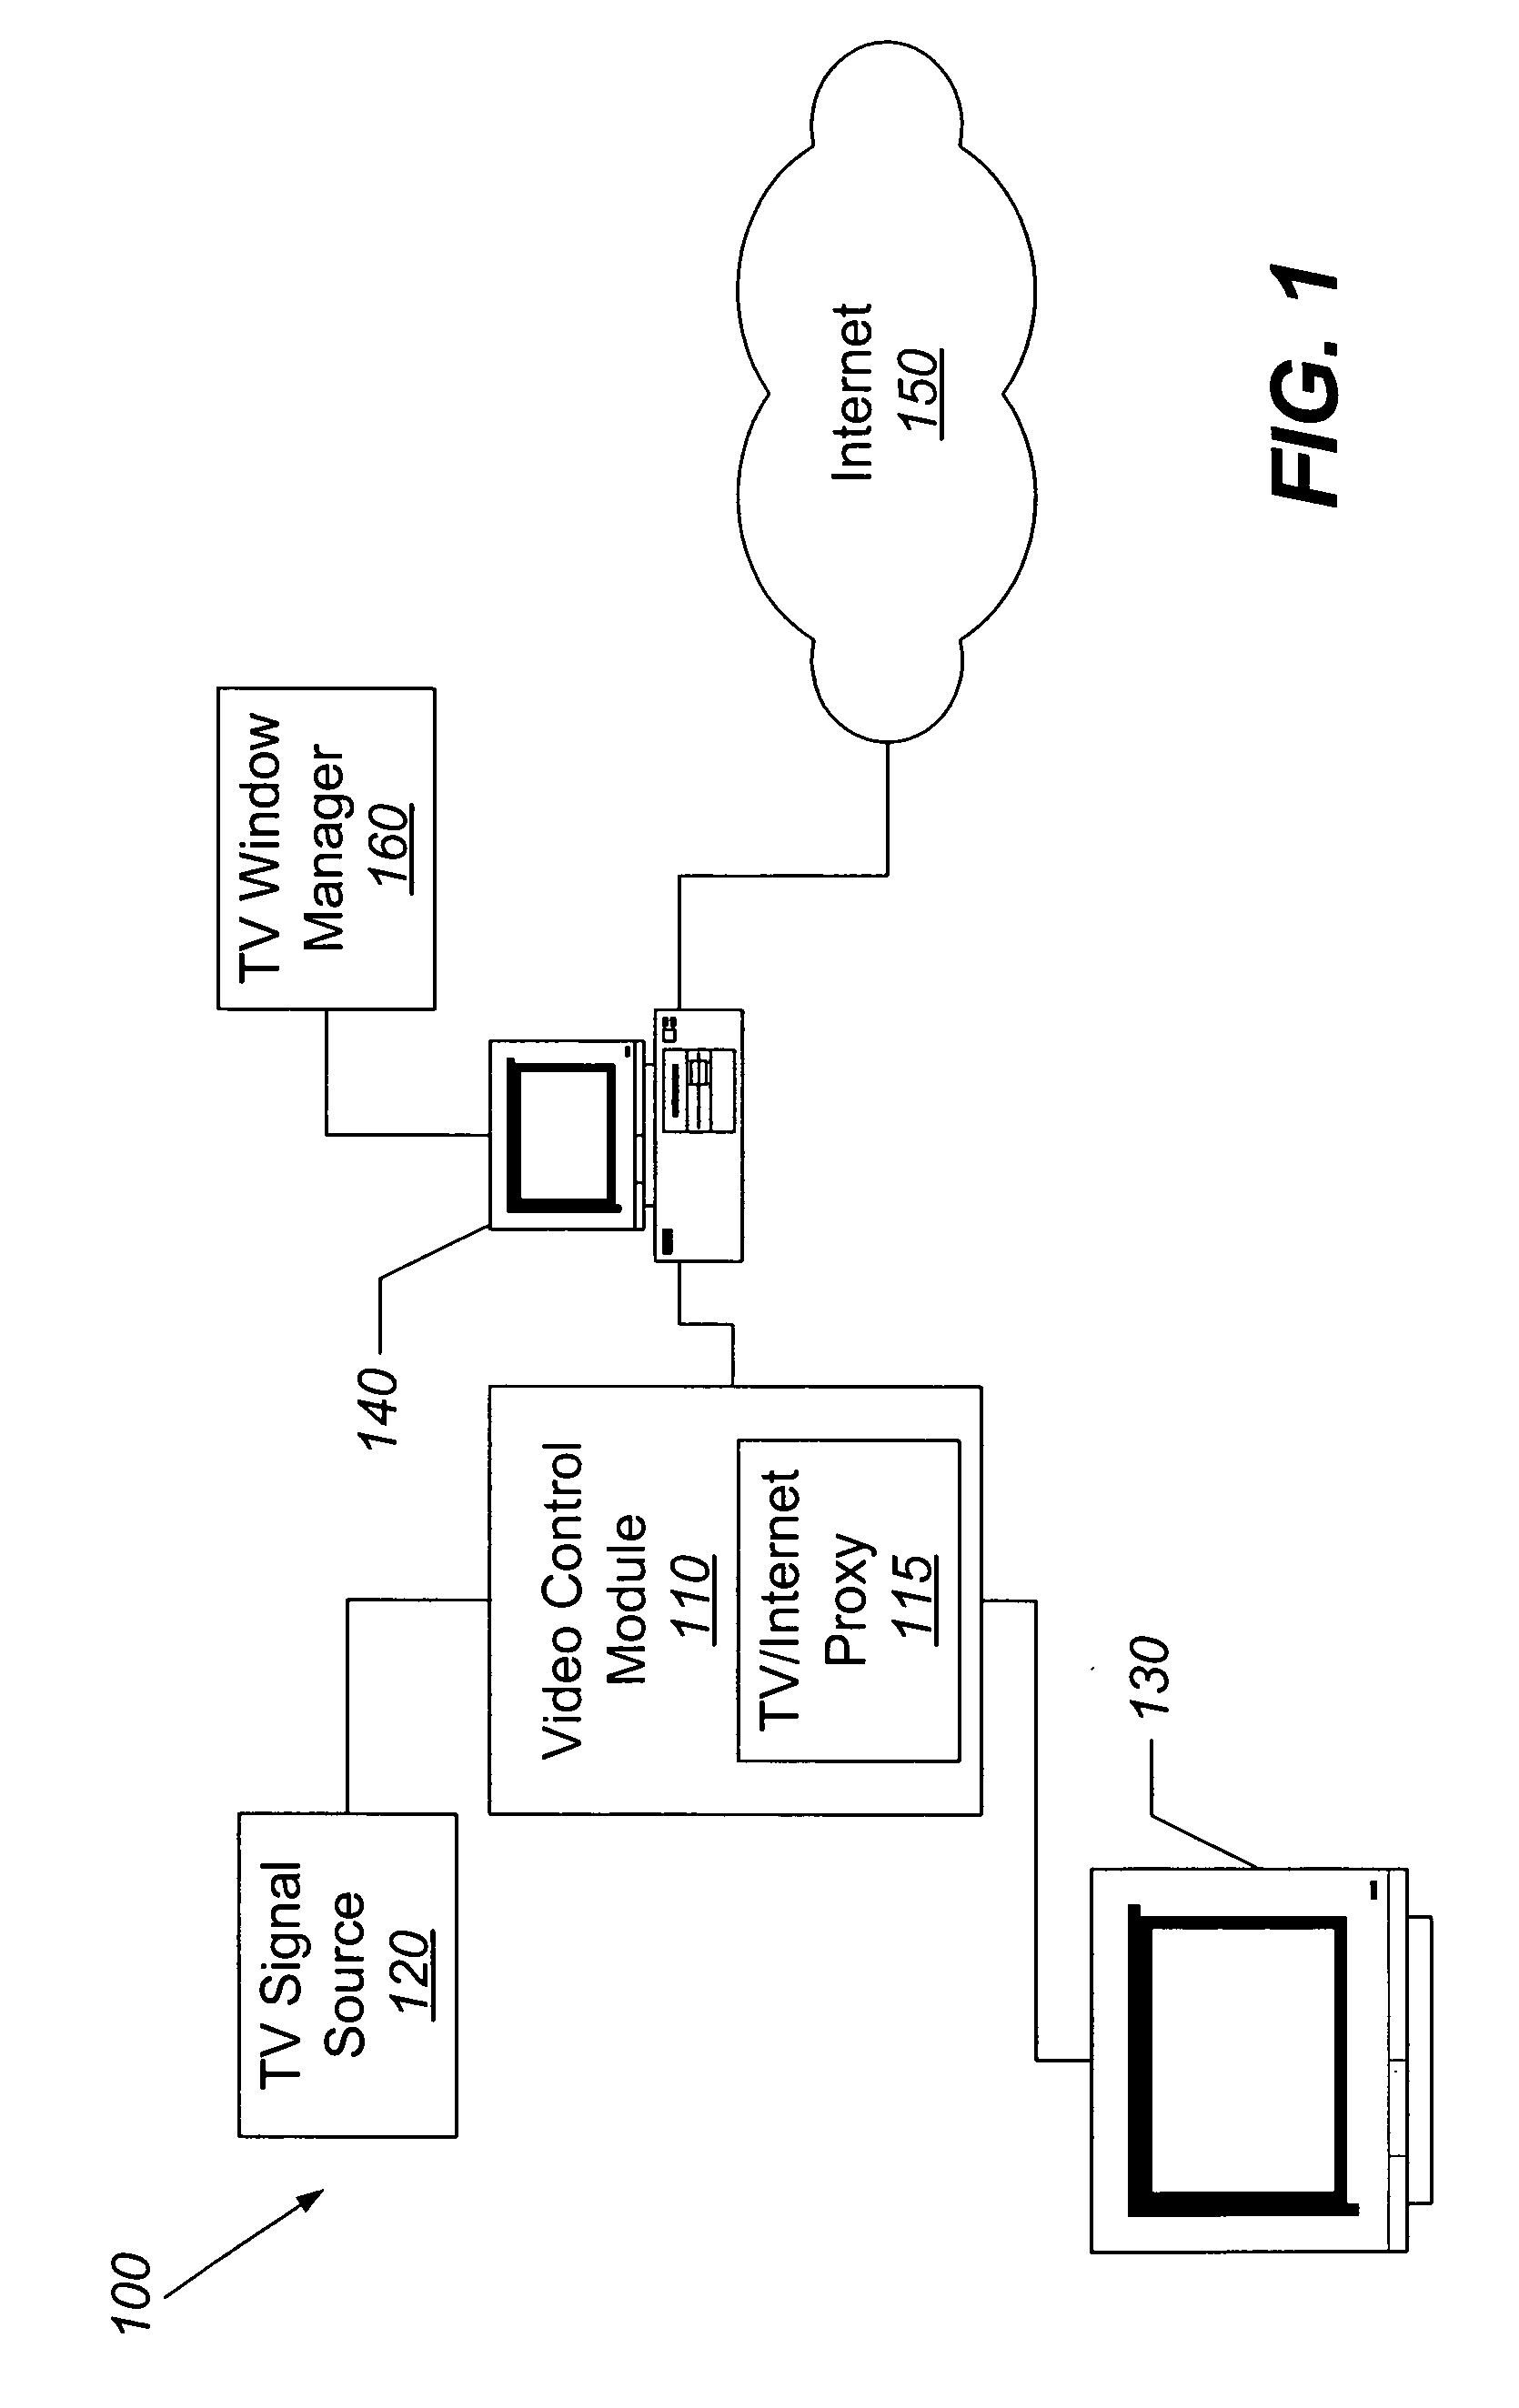 Methods, systems, and computer program products for selectively facilitating internet content and/or alerts on a television crawl screen, closed caption and/or picture-in-picture area